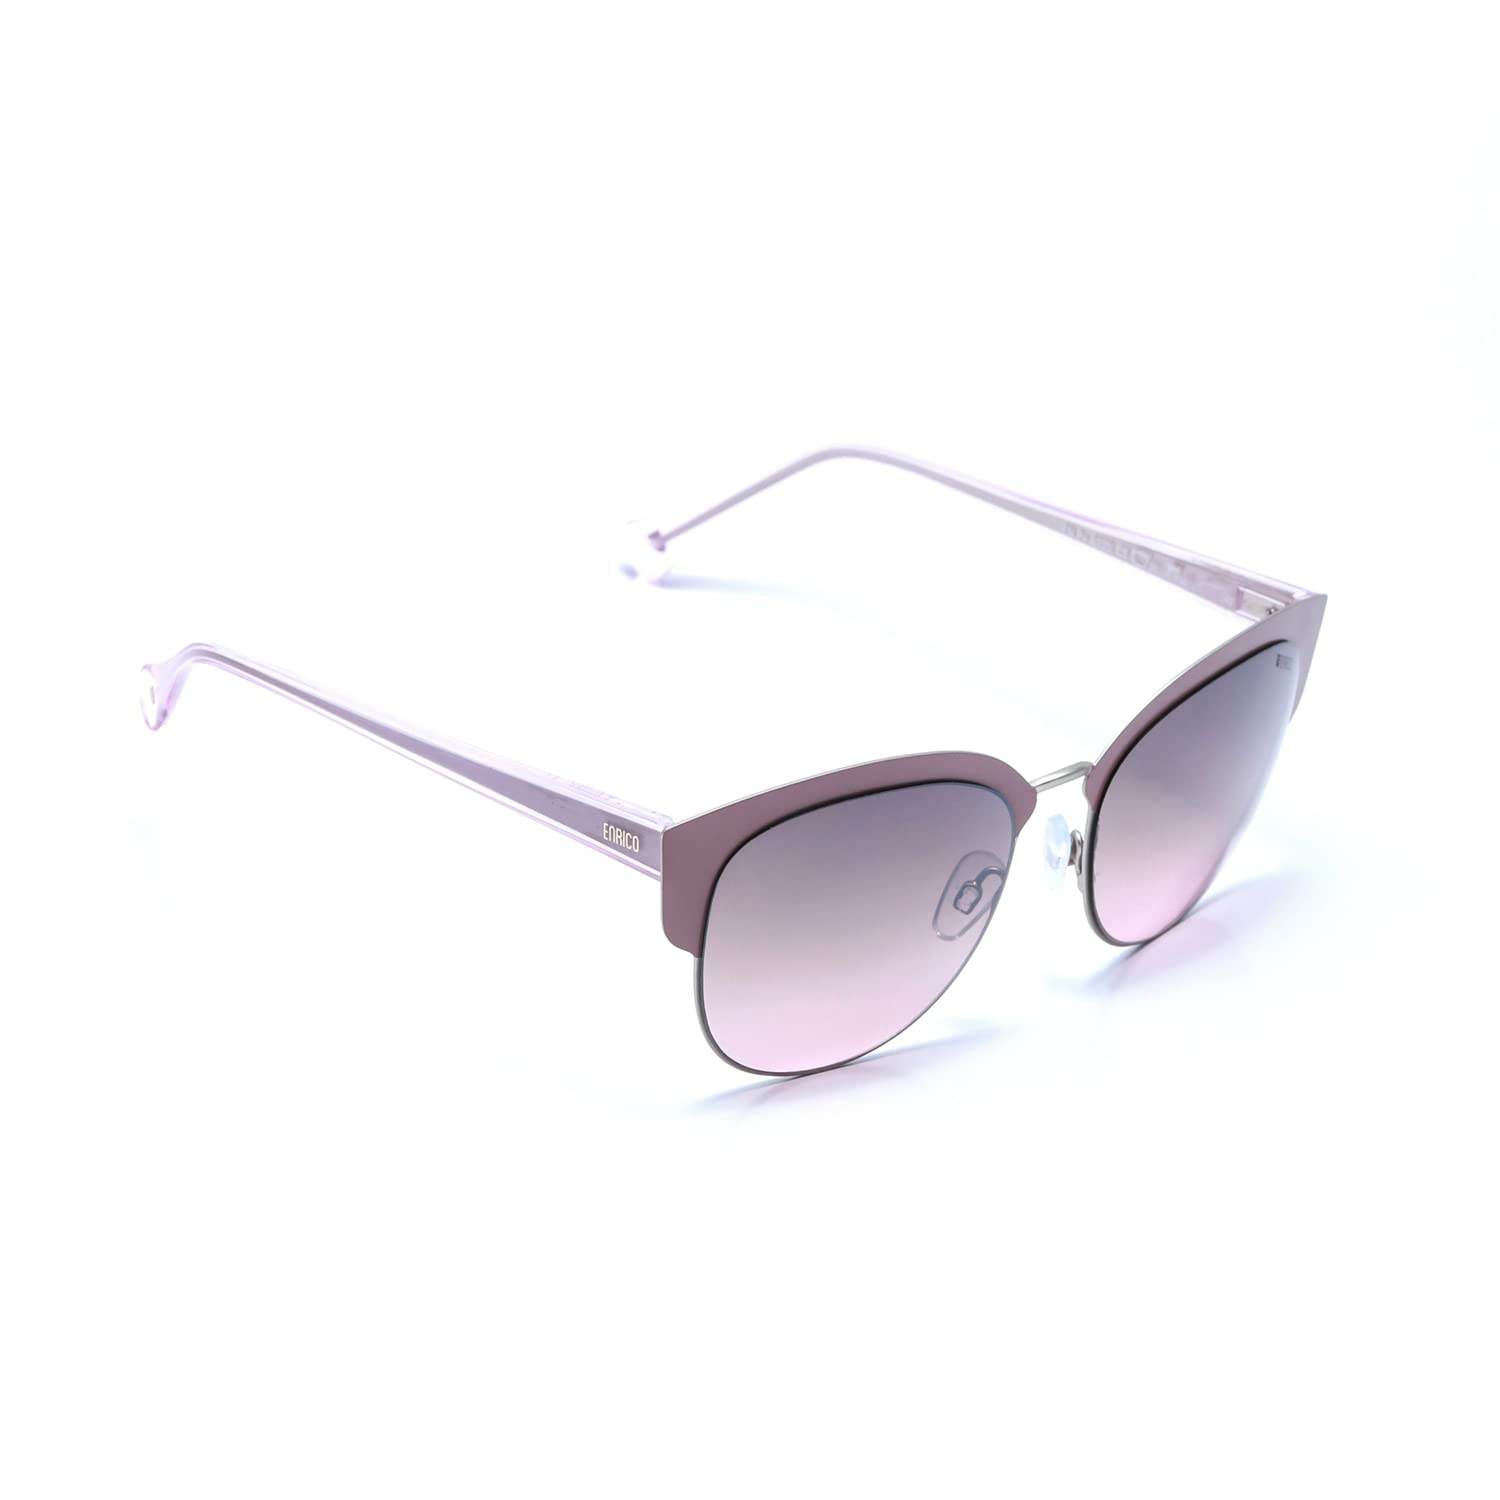 ENRICO SunFun Sunglass with Pink Browline Frames | Pink - Color Polycarbonate Material |Adults-Women Sunglasses with Cover Case 